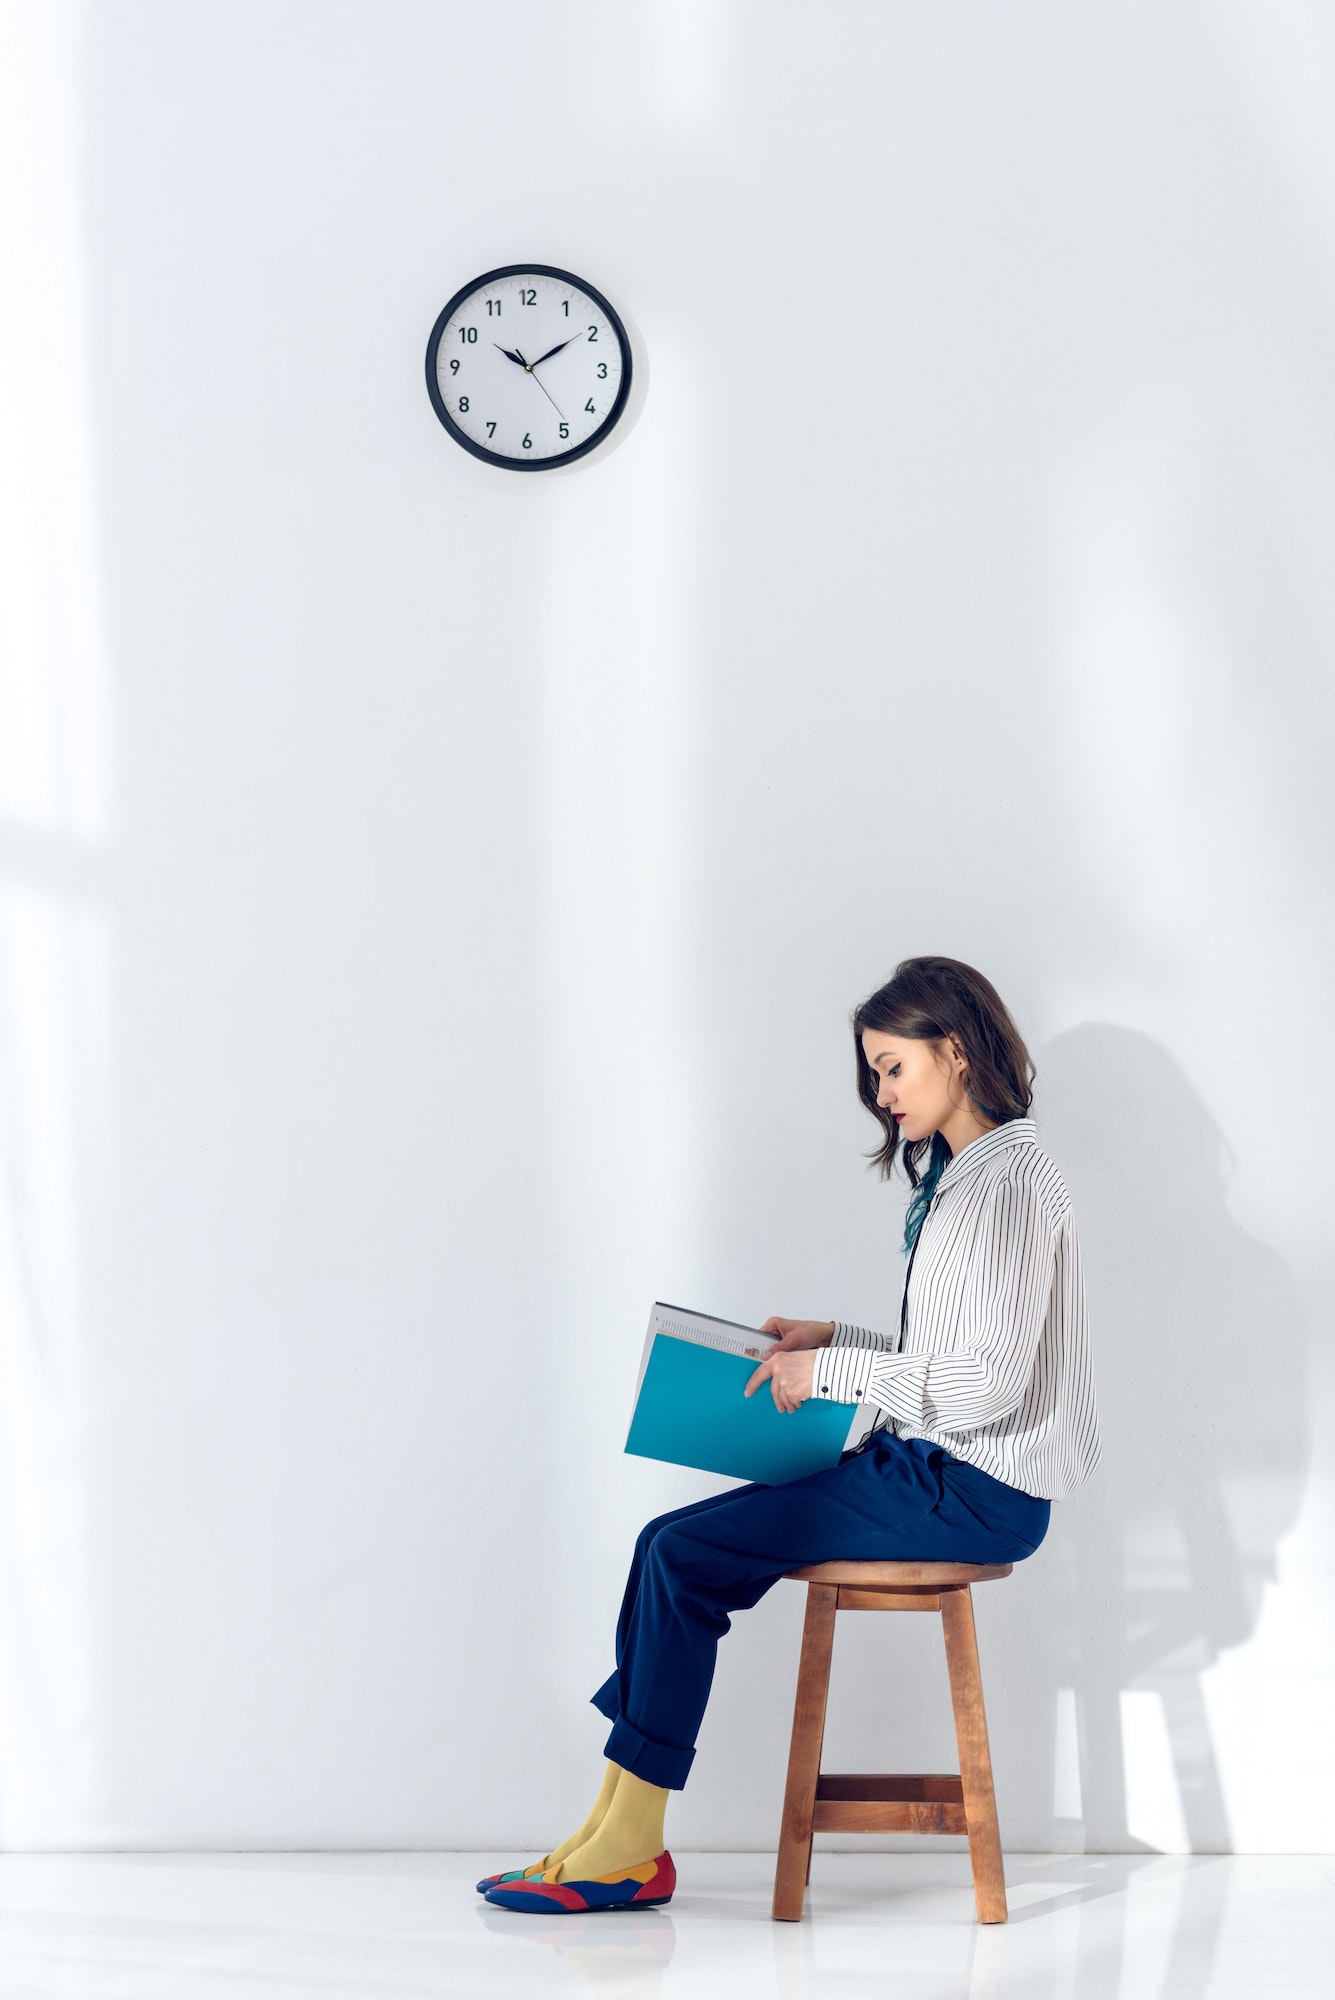 Attractive young girl sitting on chair and reading book under clock